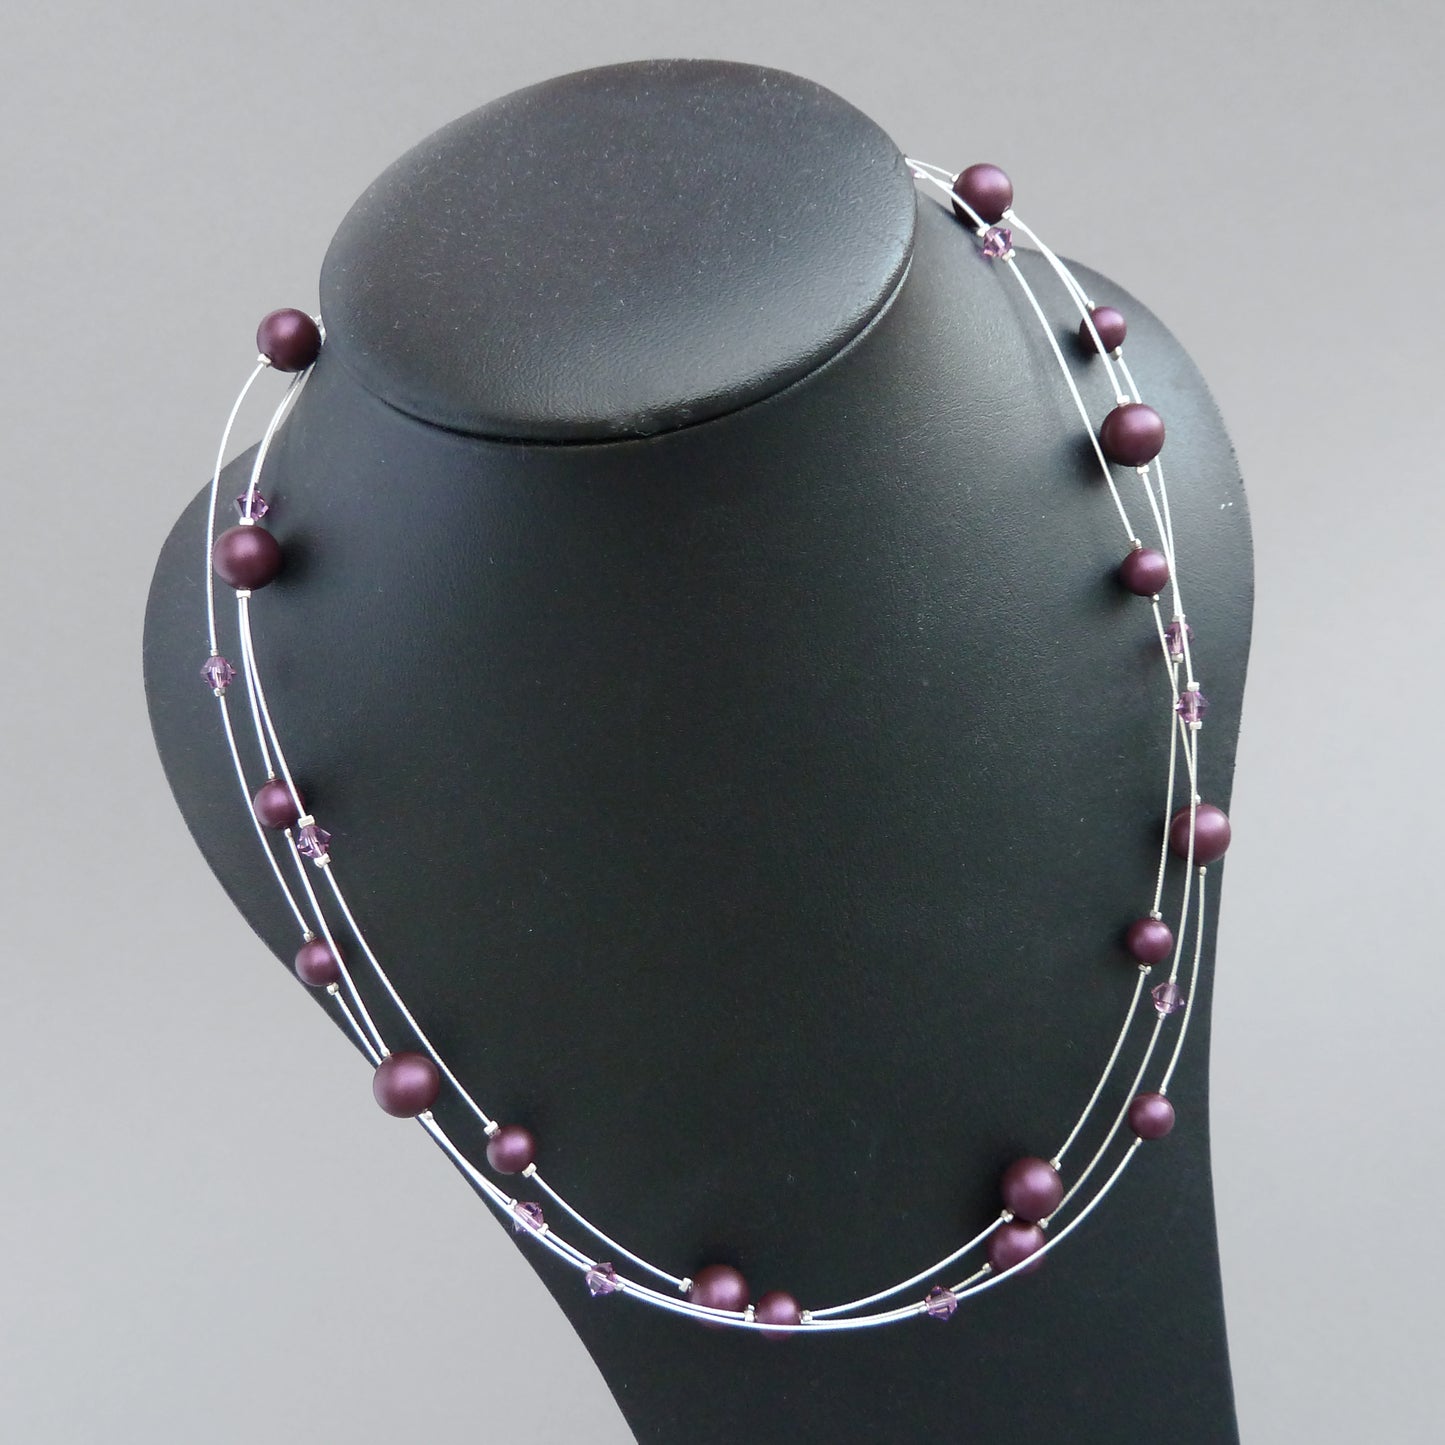 Plum multi strand necklaces for weddings